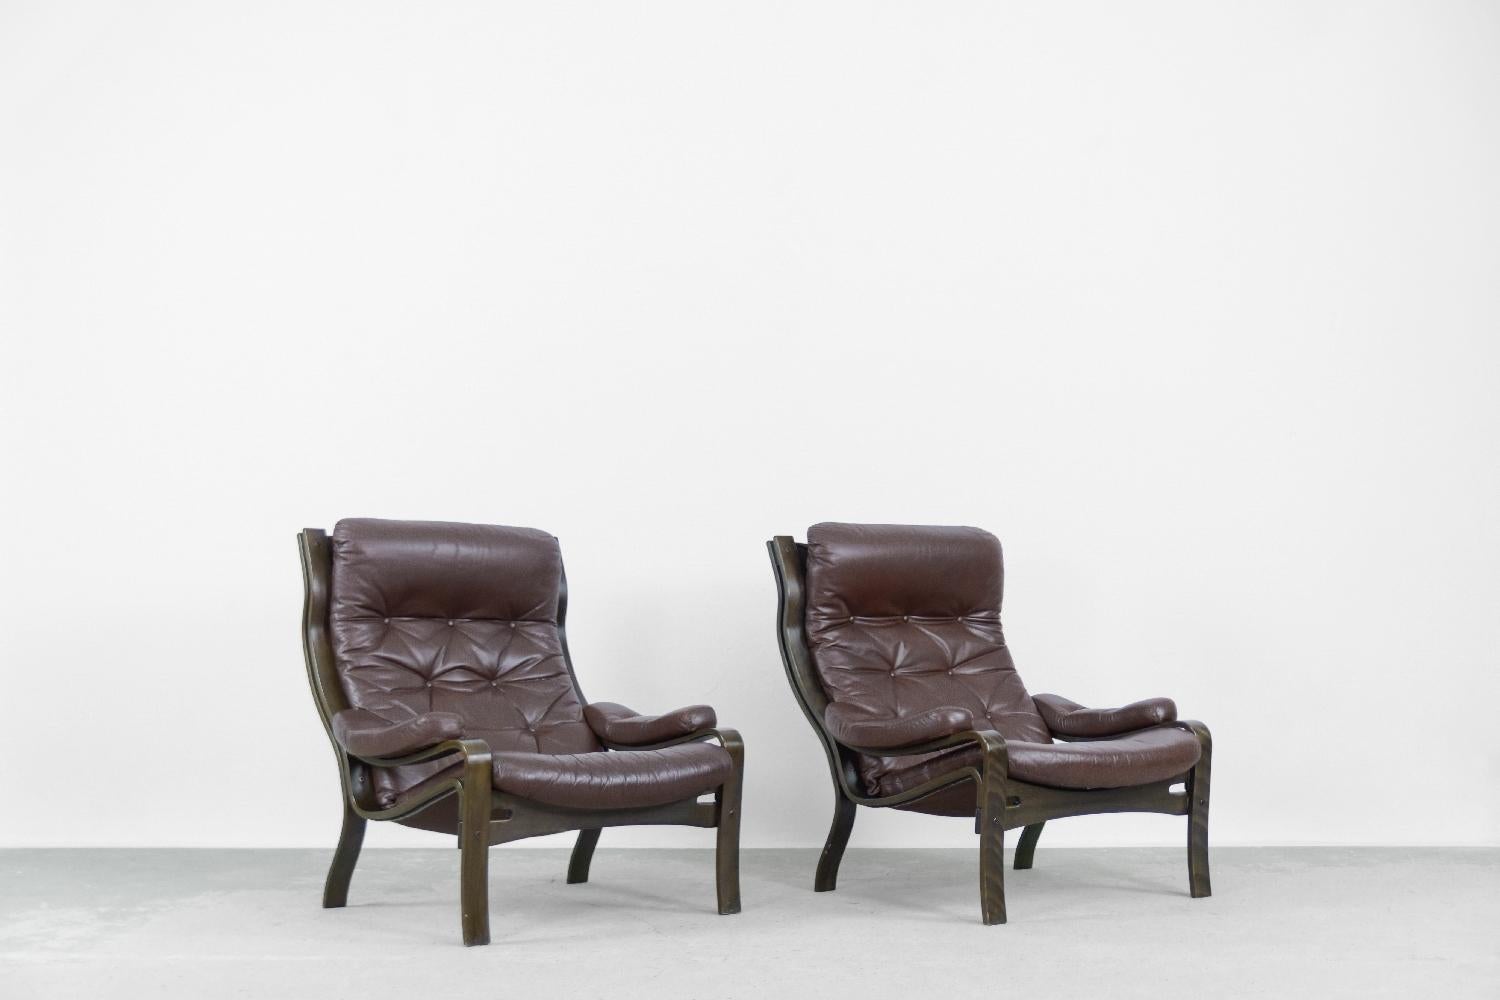 This set of high armchairs was manufactured in Scandinavia (probably Norway) during the 1970s. The solid structure is made of molded wood. The quilted pillows are upholstered with natural leather in a dark chocolate color. The armrests are